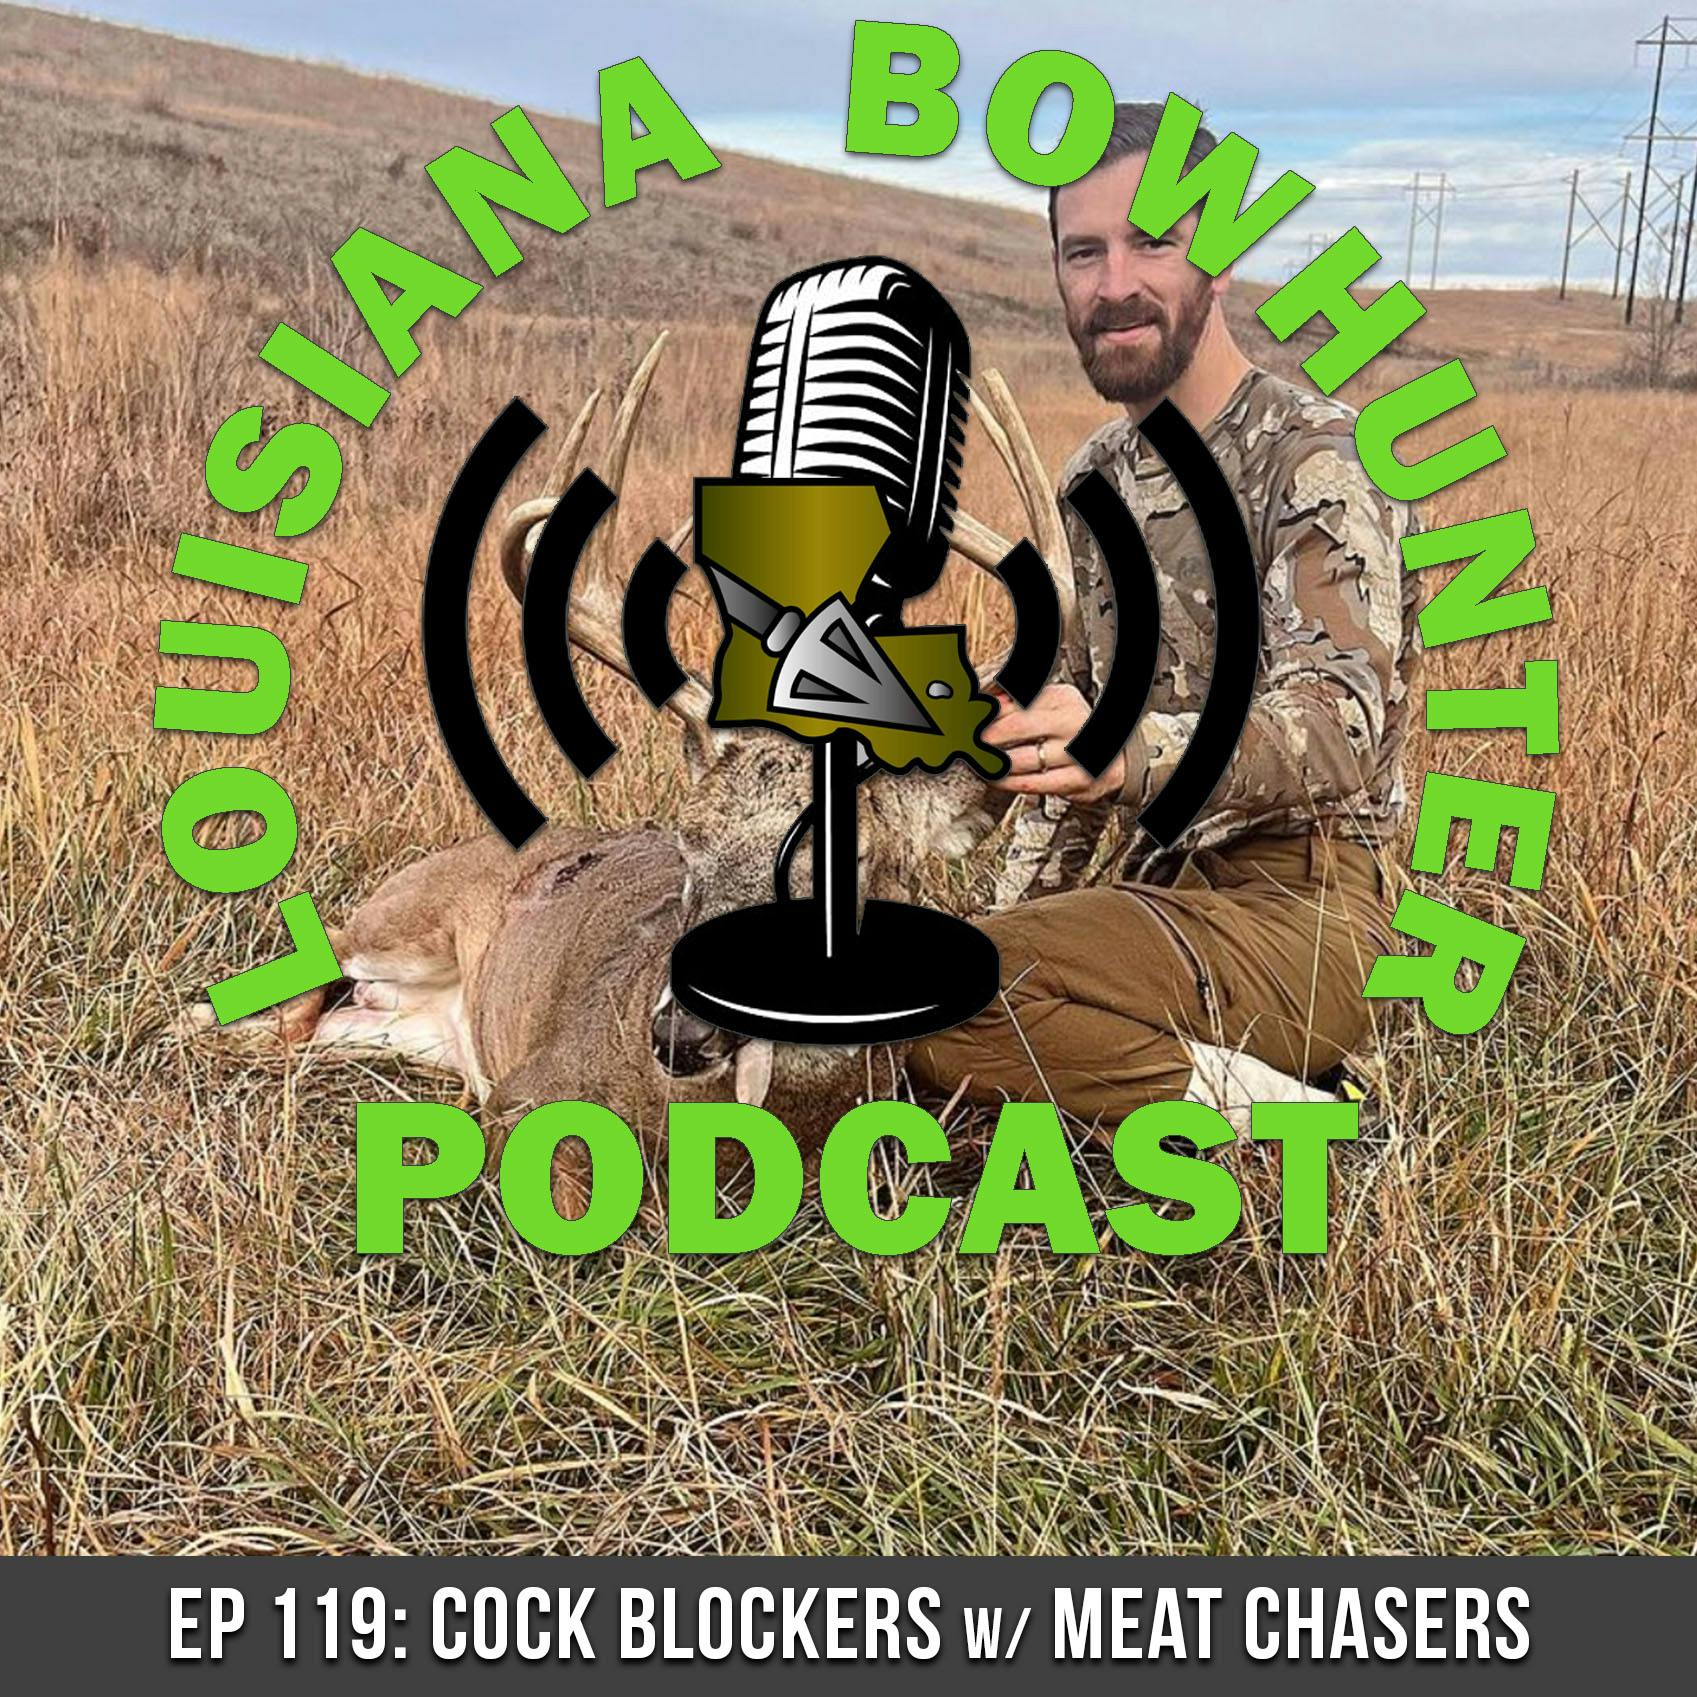 Episode 119: Cock Blockers w/ Meat Chasers